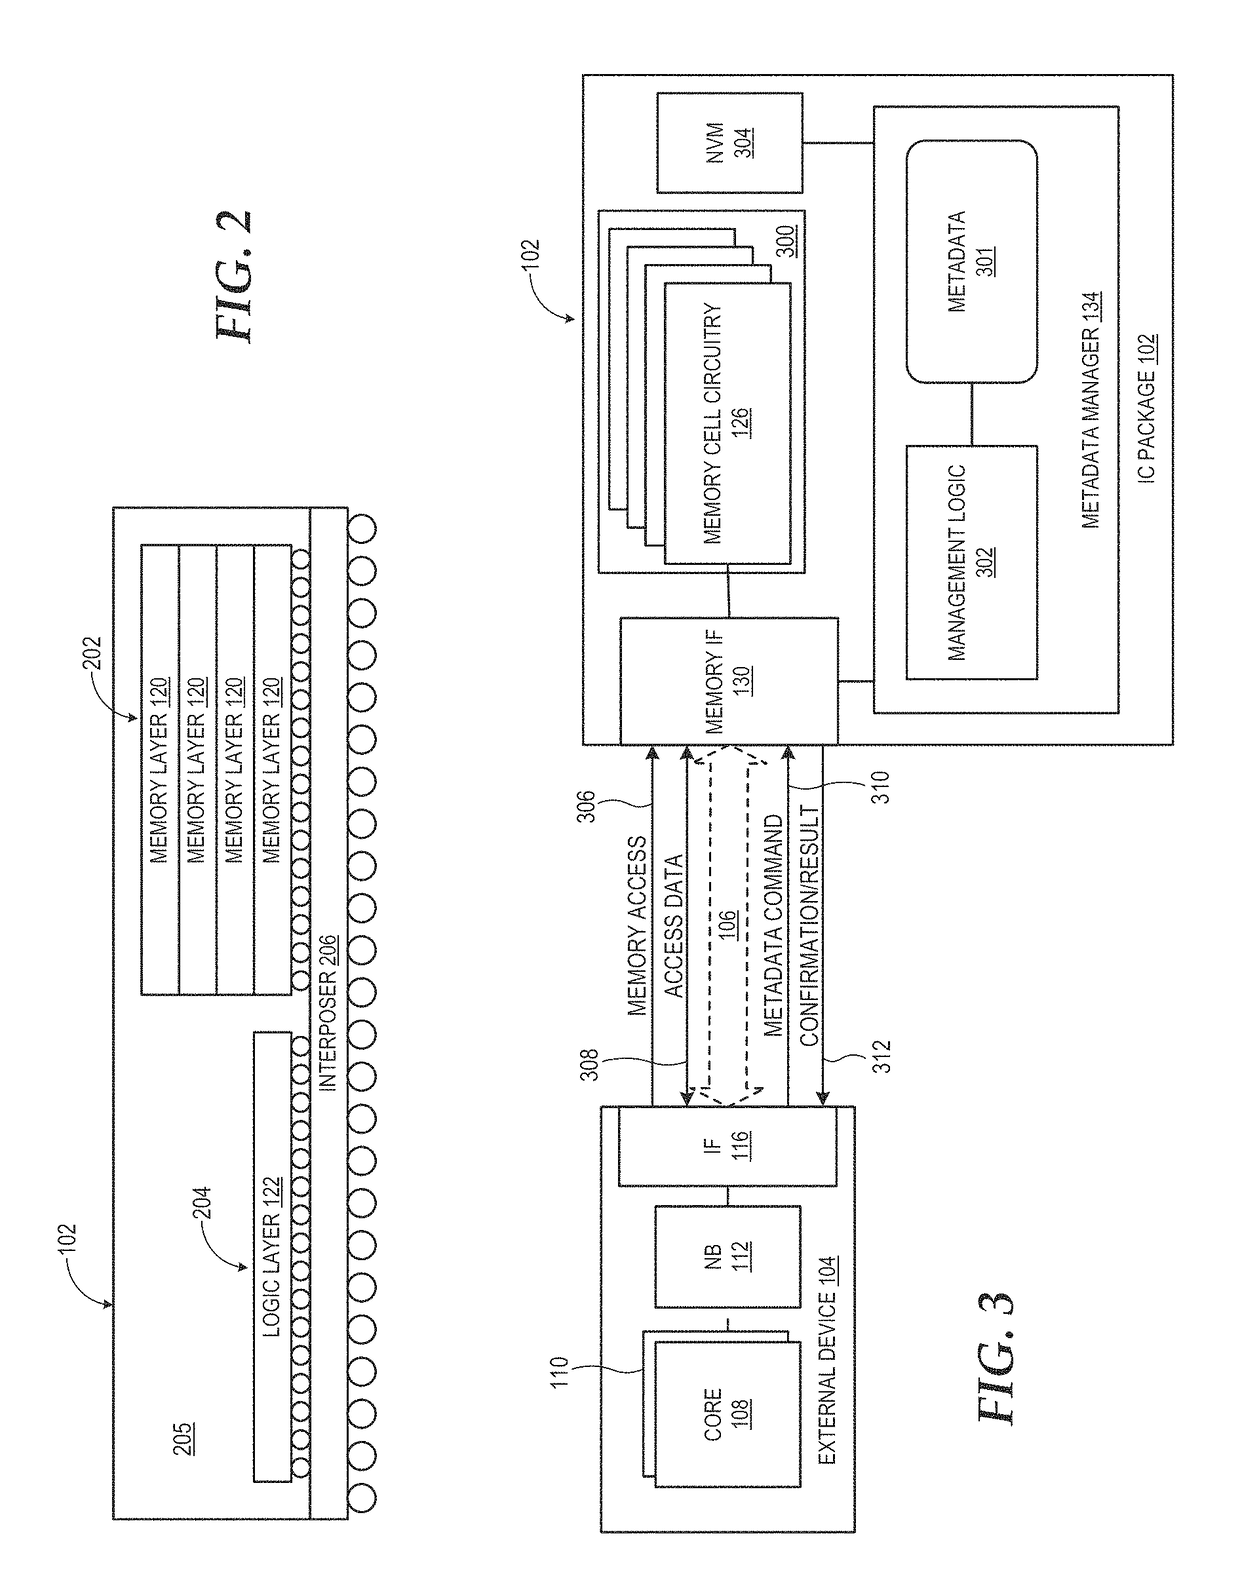 Stacked memory device with metadata management